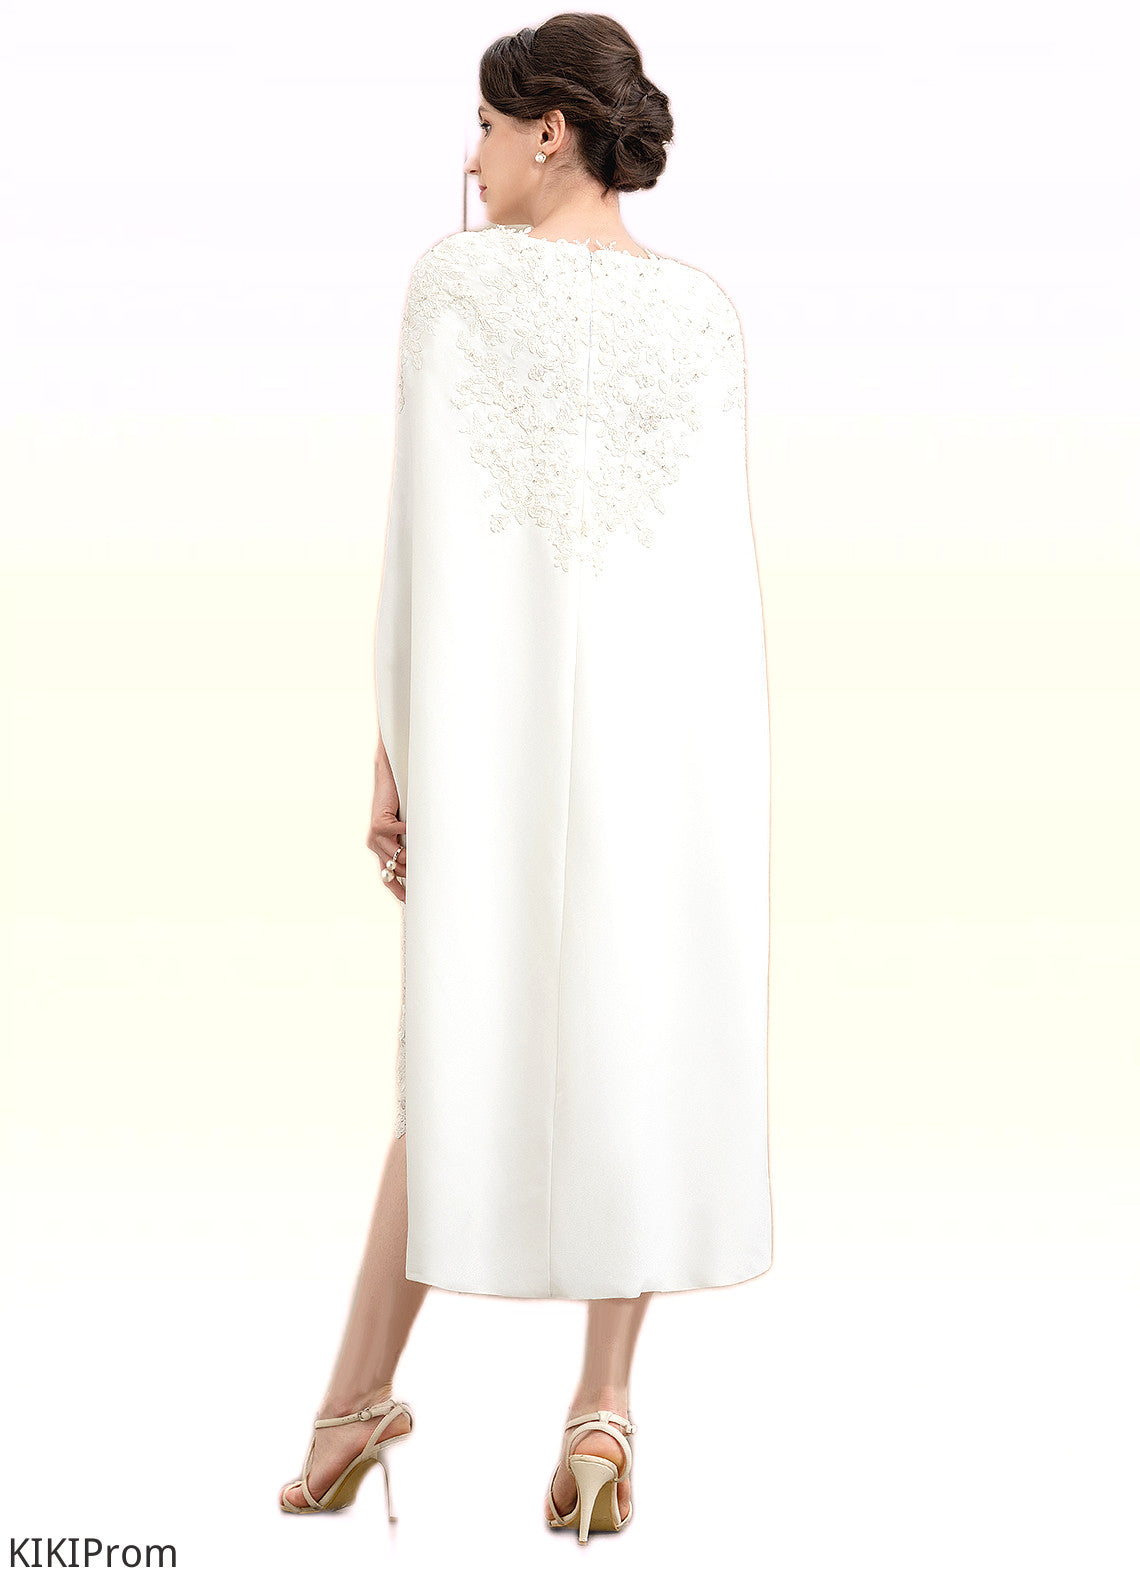 Ally Sheath/Column Sweetheart Knee-Length Lace Stretch Crepe Mother of the Bride Dress With Beading DZ126P0014973